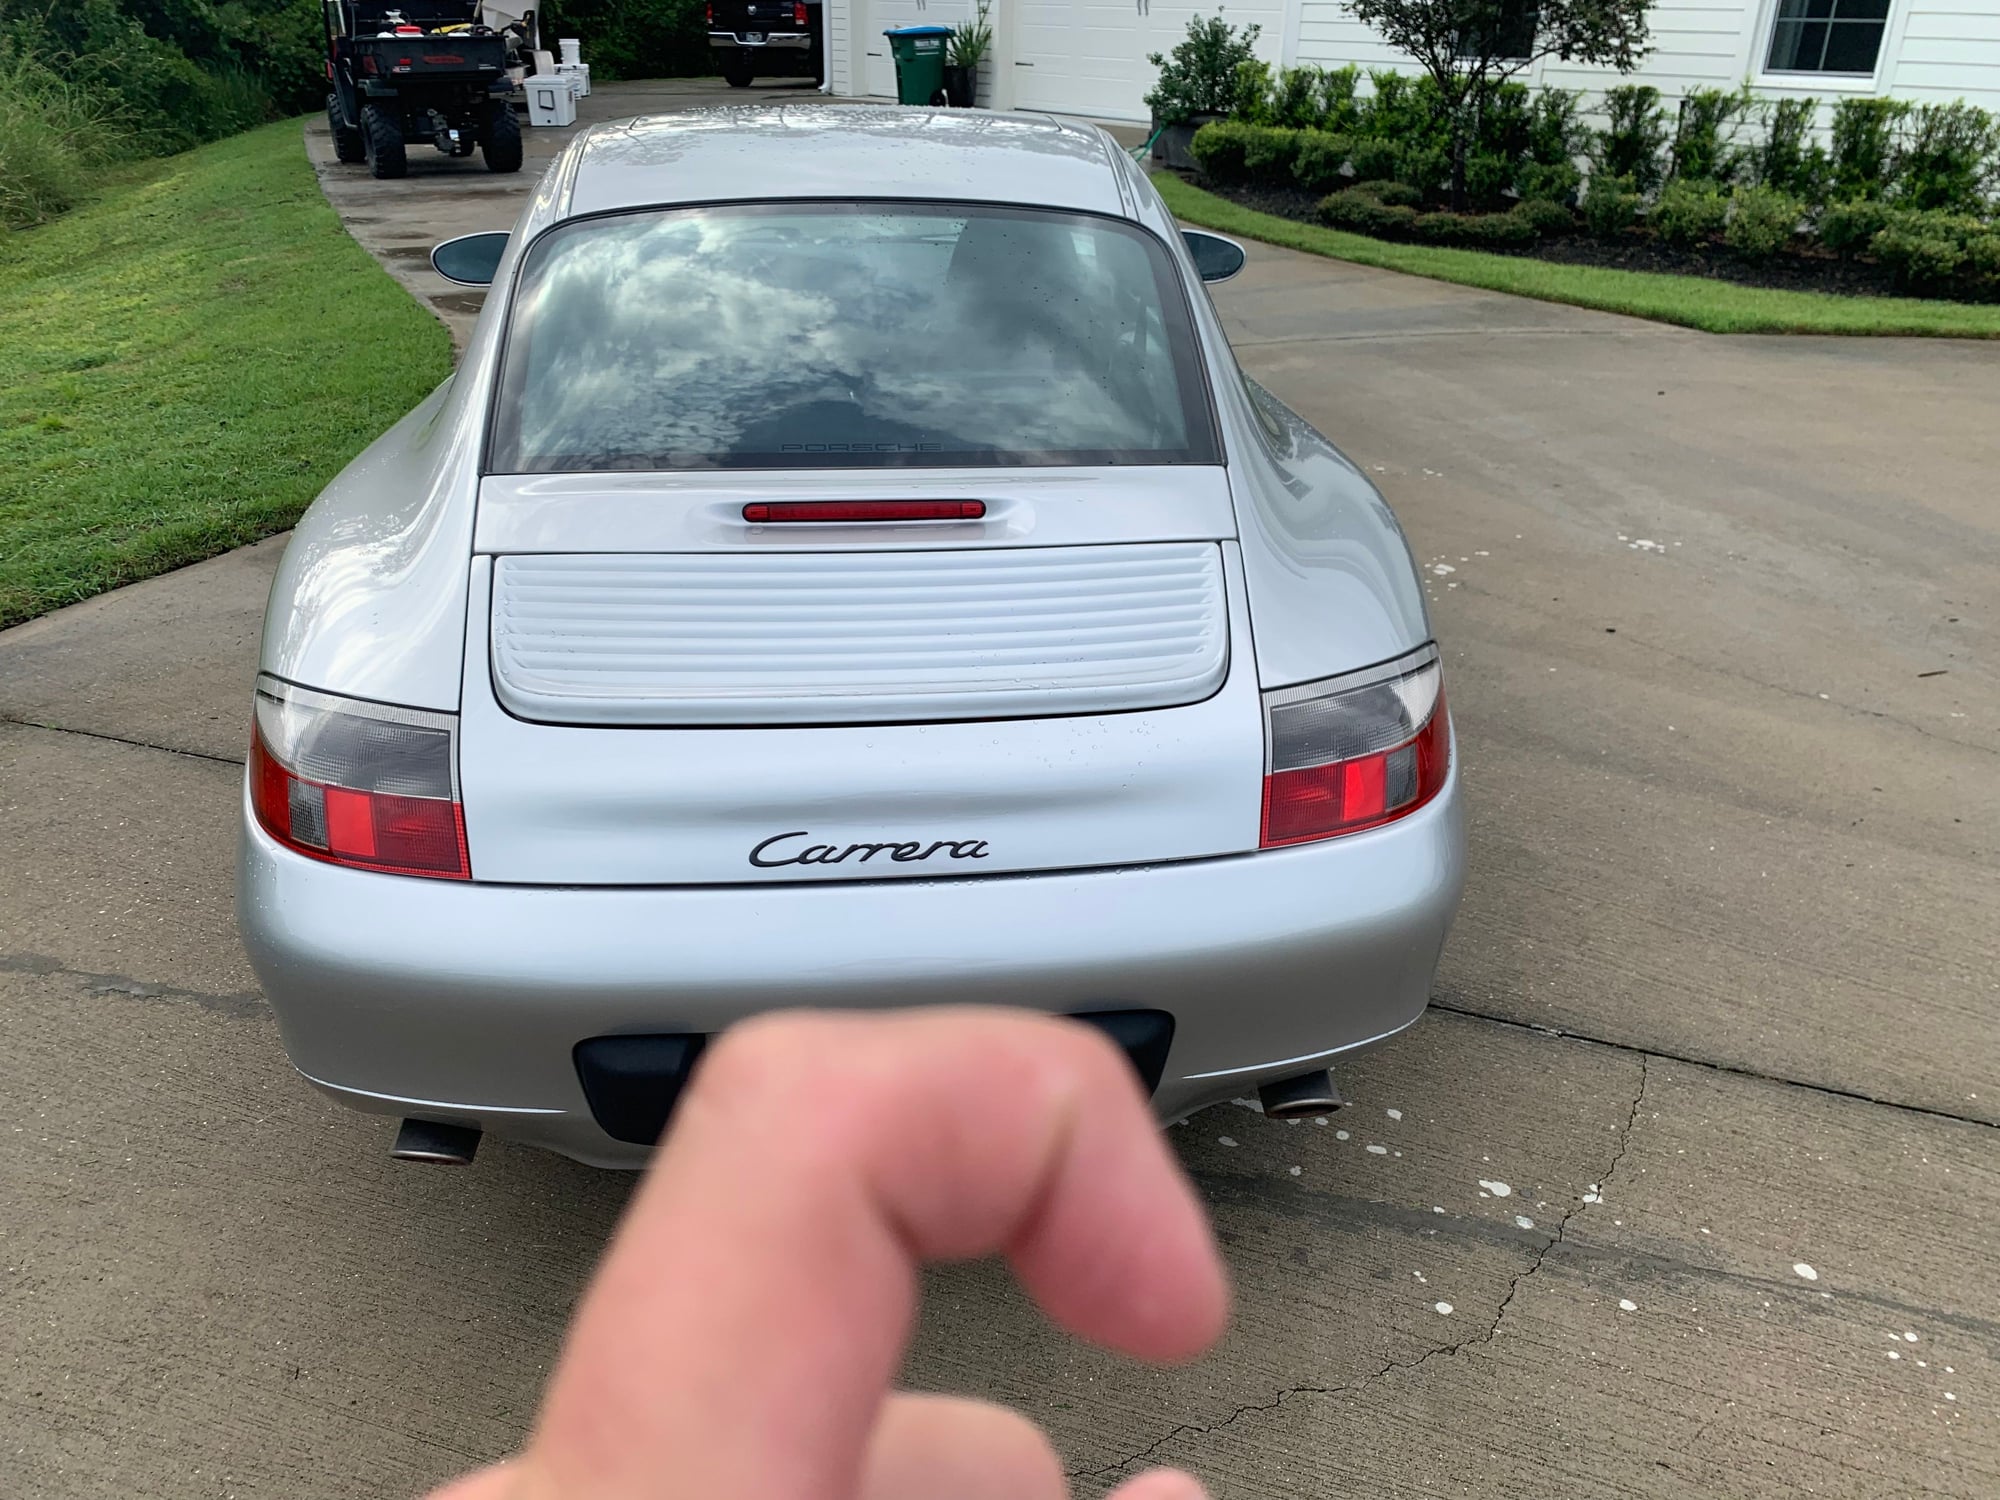 2001 Porsche 911 - 996 for sale, 55k miles, ims just done, silver ext black int - Used - VIN WPoAA29981S620745 - 55,000 Miles - 6 cyl - 2WD - Manual - Coupe - Silver - Longwood, FL 32750, United States